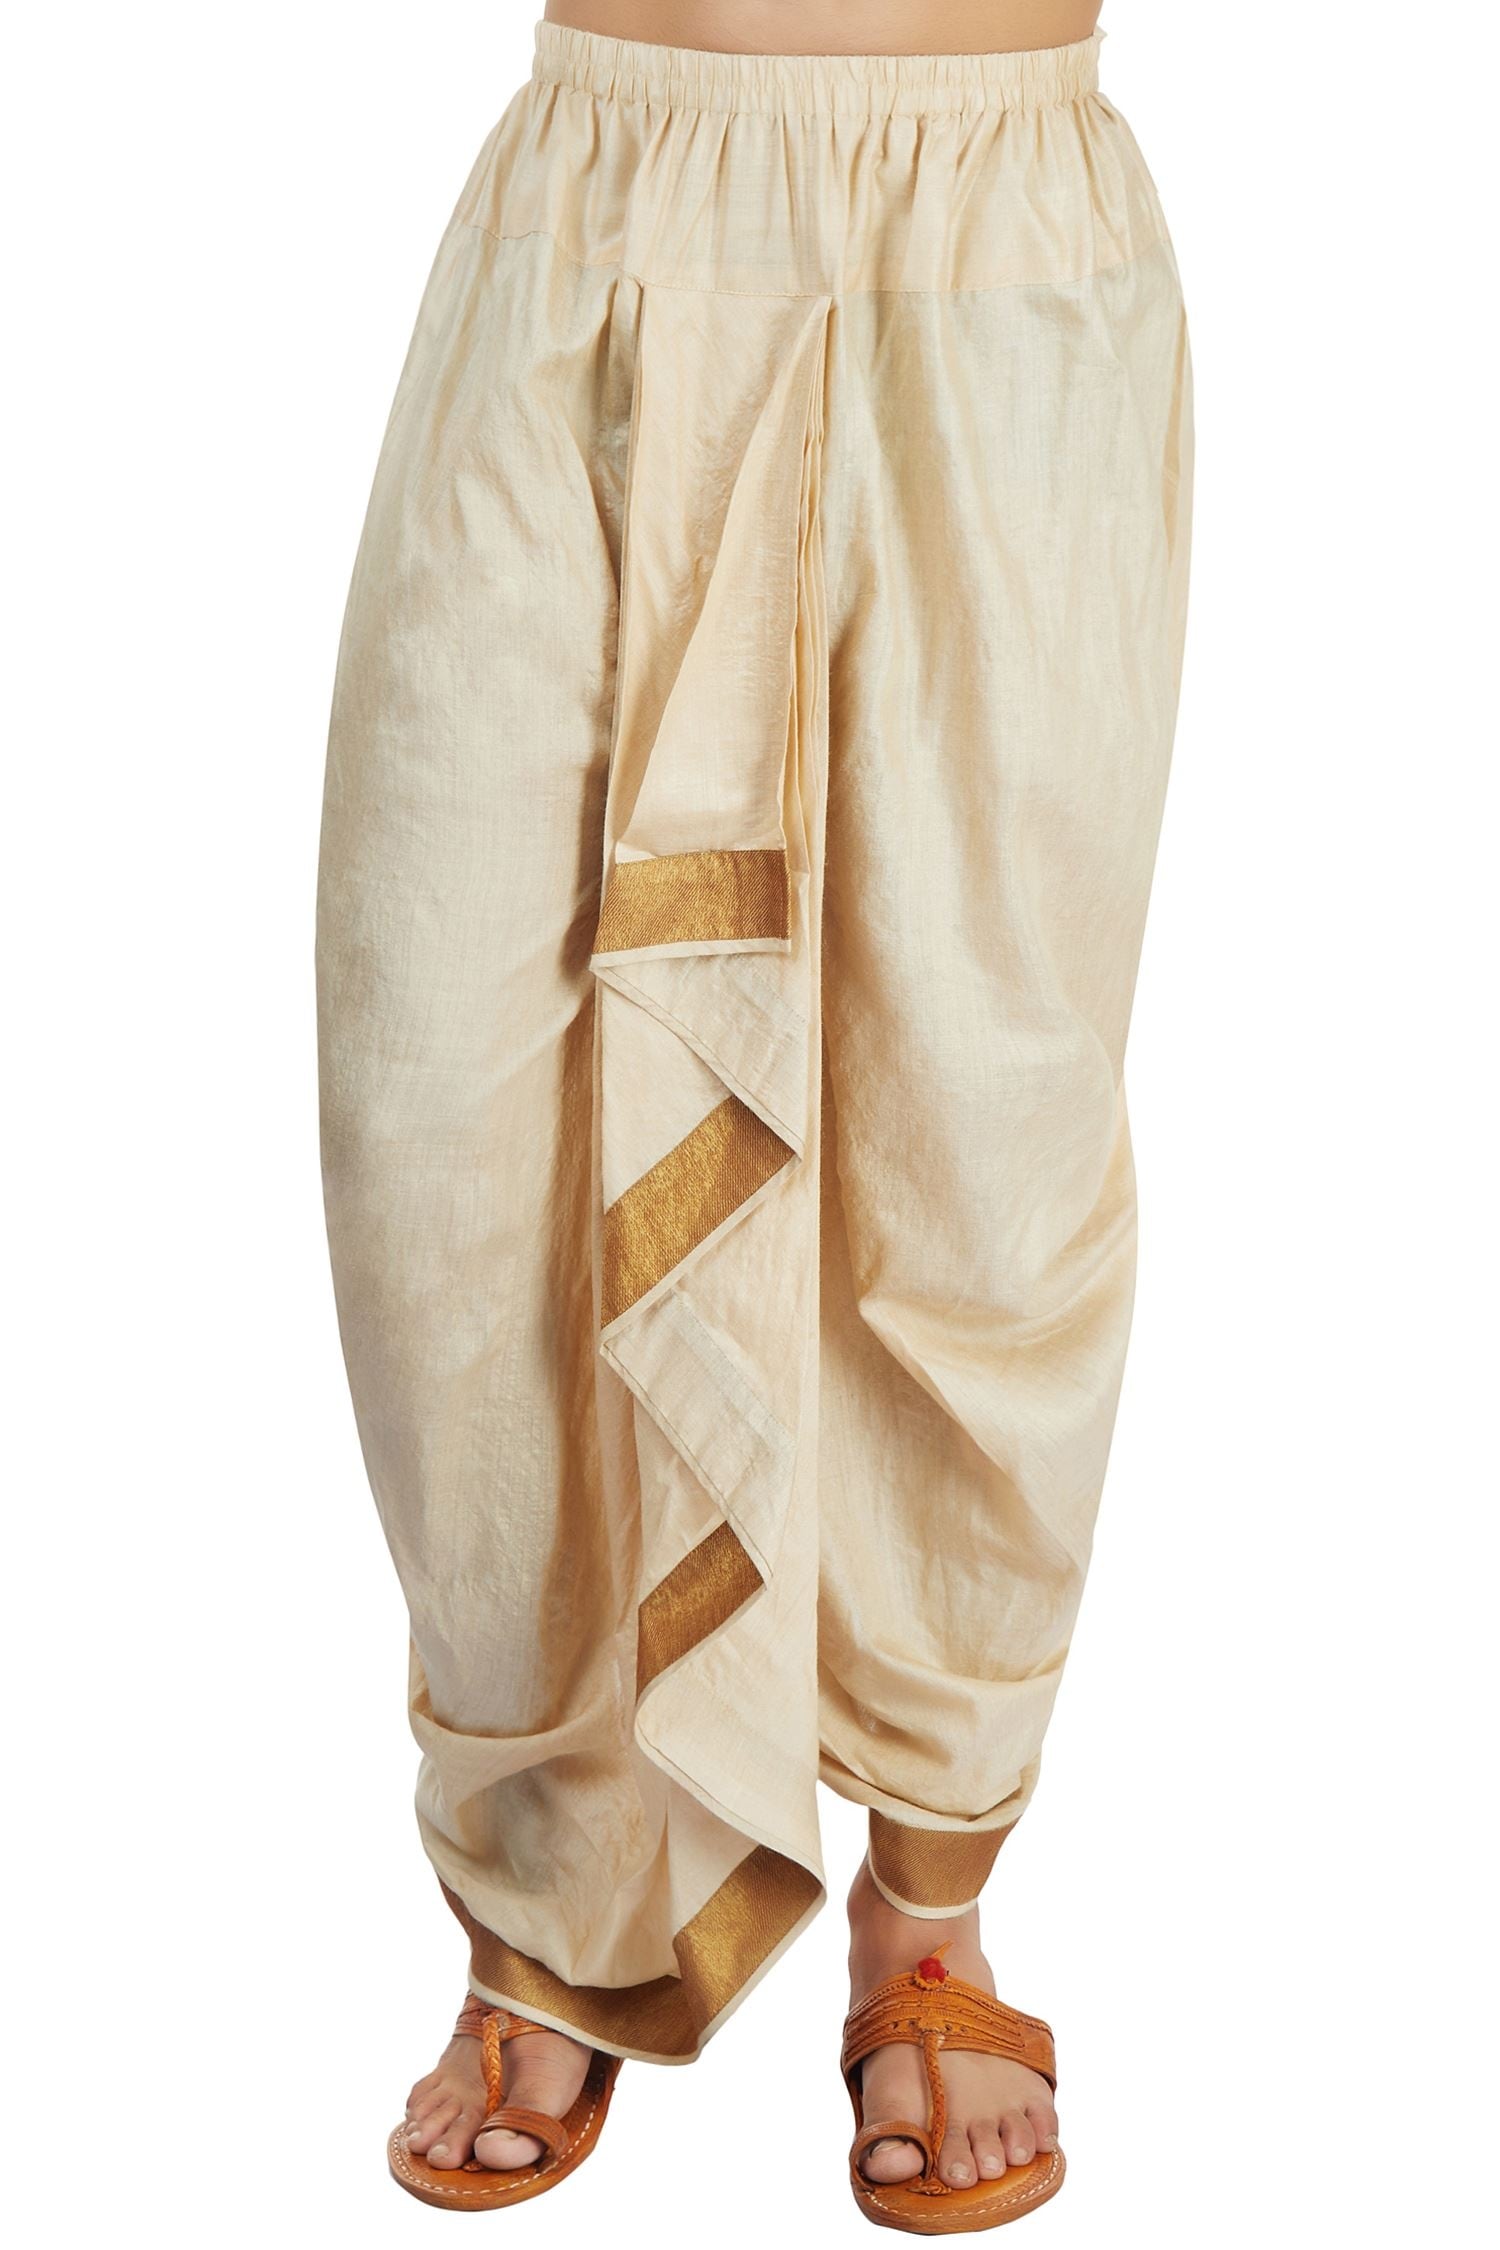 Buy Pleated Dhoti Pants Online at Best Prices in India - JioMart.